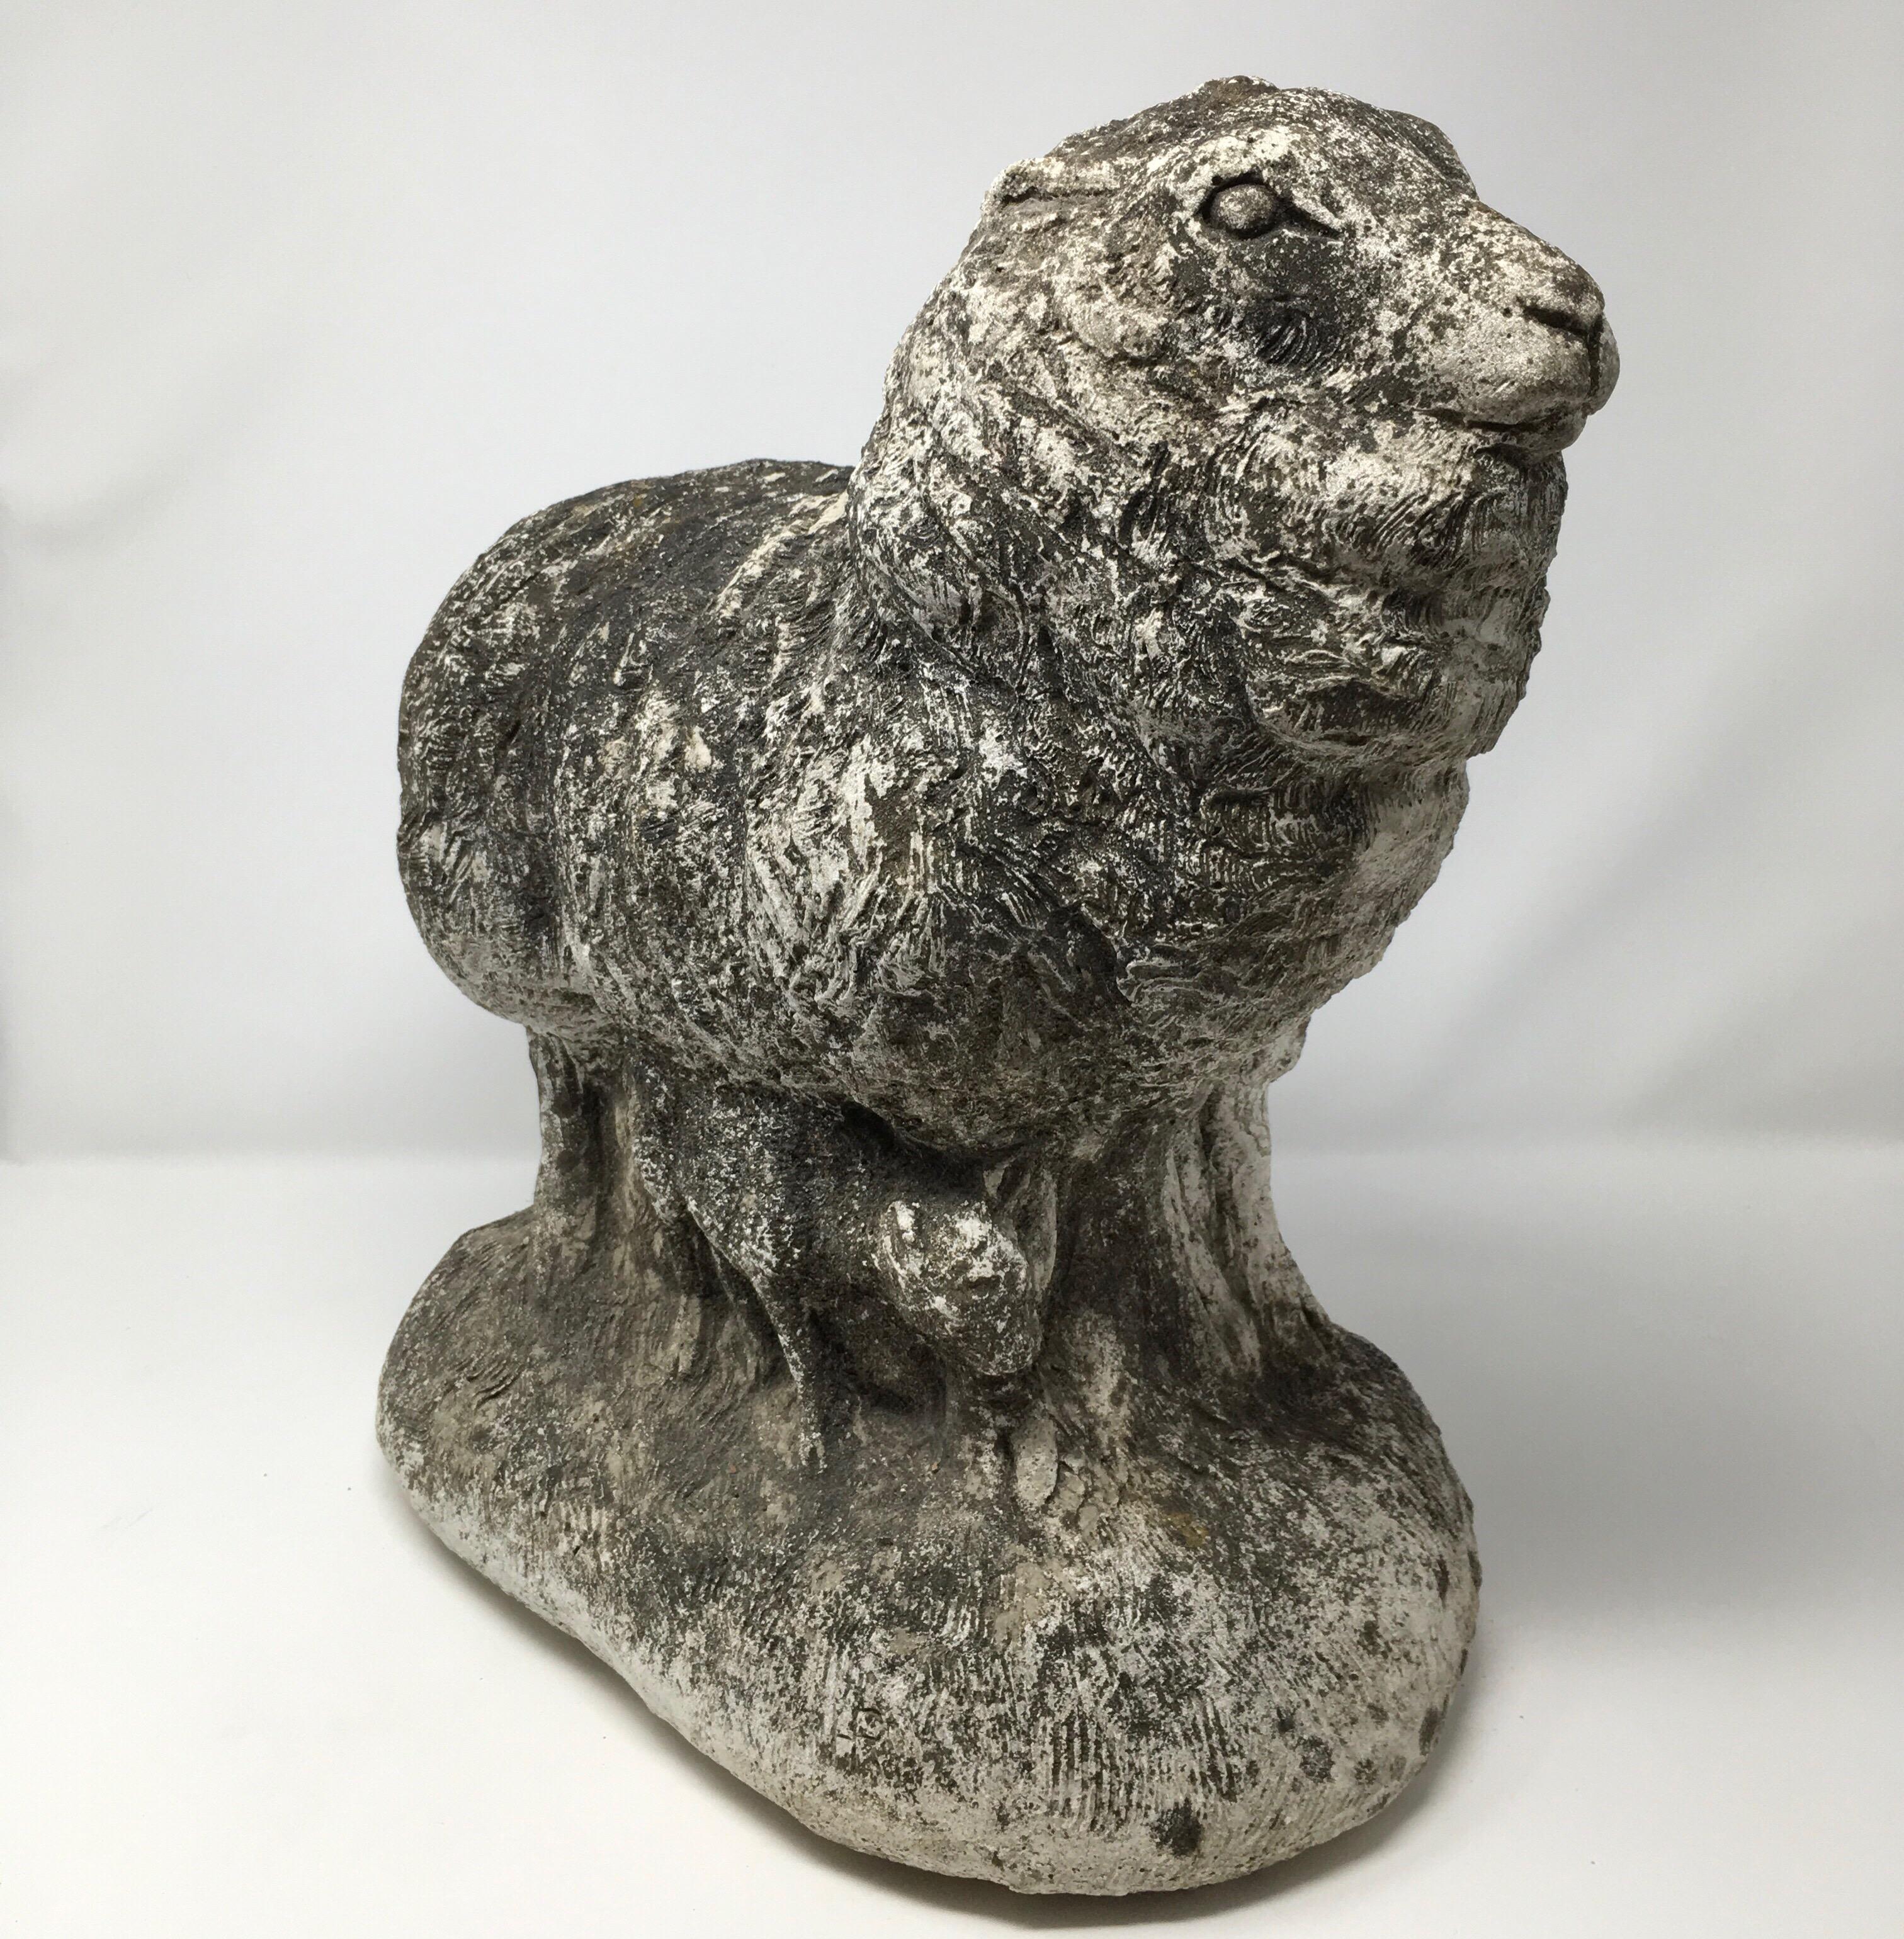 An adorable concrete sheep found in France. With an aged patina this sheep statue will be a great addition to your home or garden.